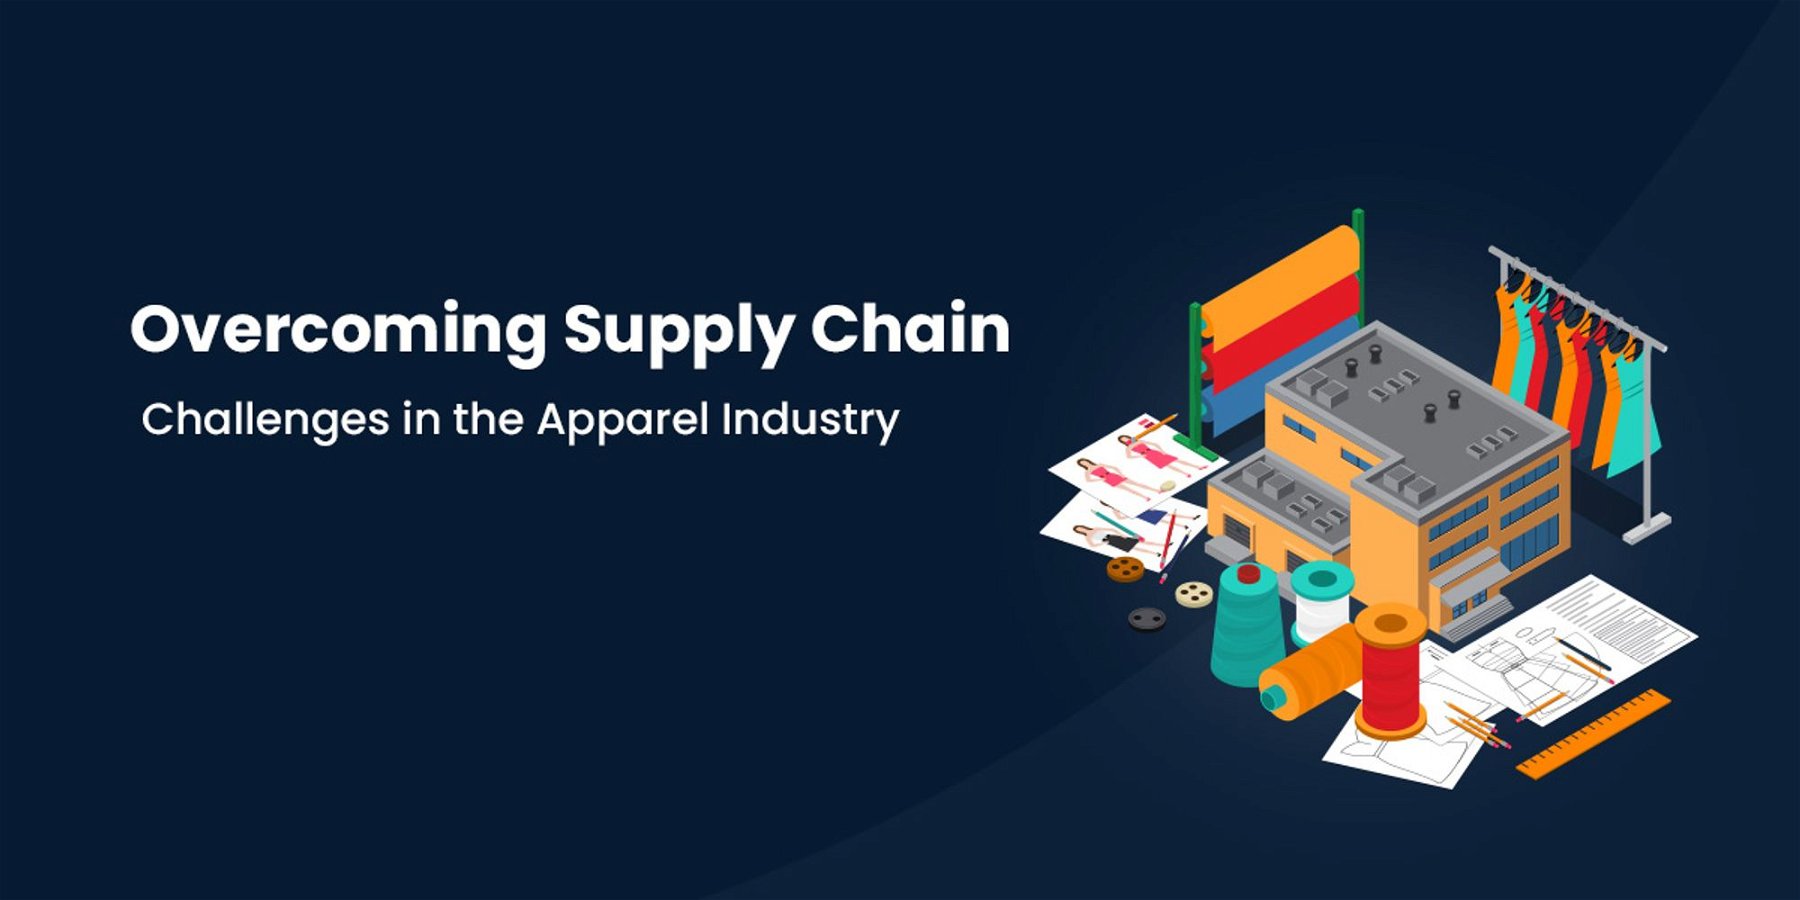 Overcoming Supply Chain Challenges in the Apparel Industry